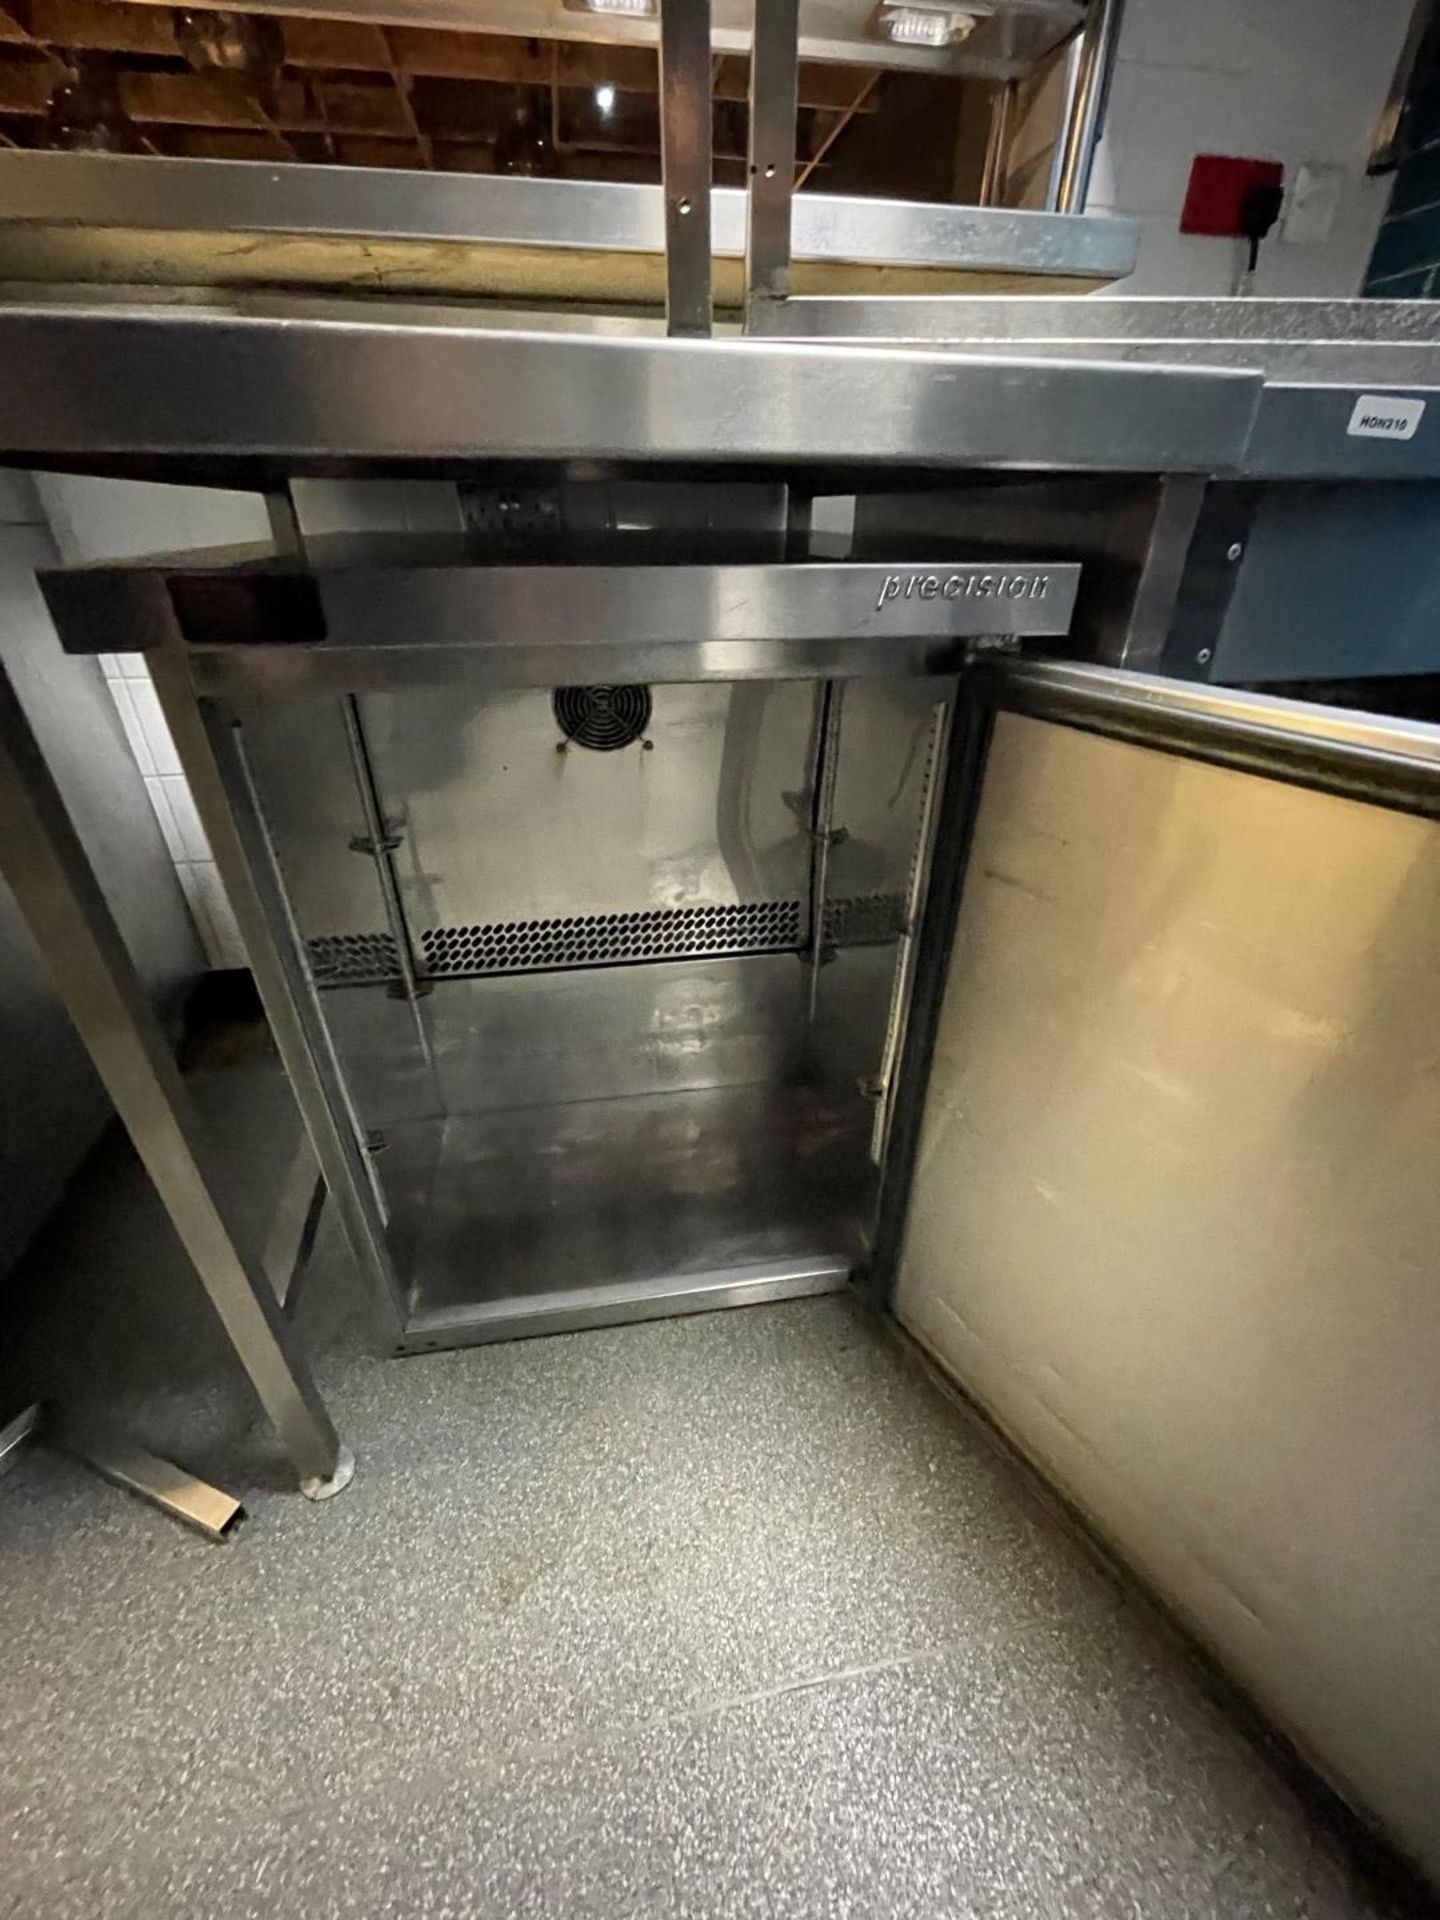 1 x Precision HPU150 Undercounter Refrigerator With Stainless Steel Finish. - Image 2 of 3